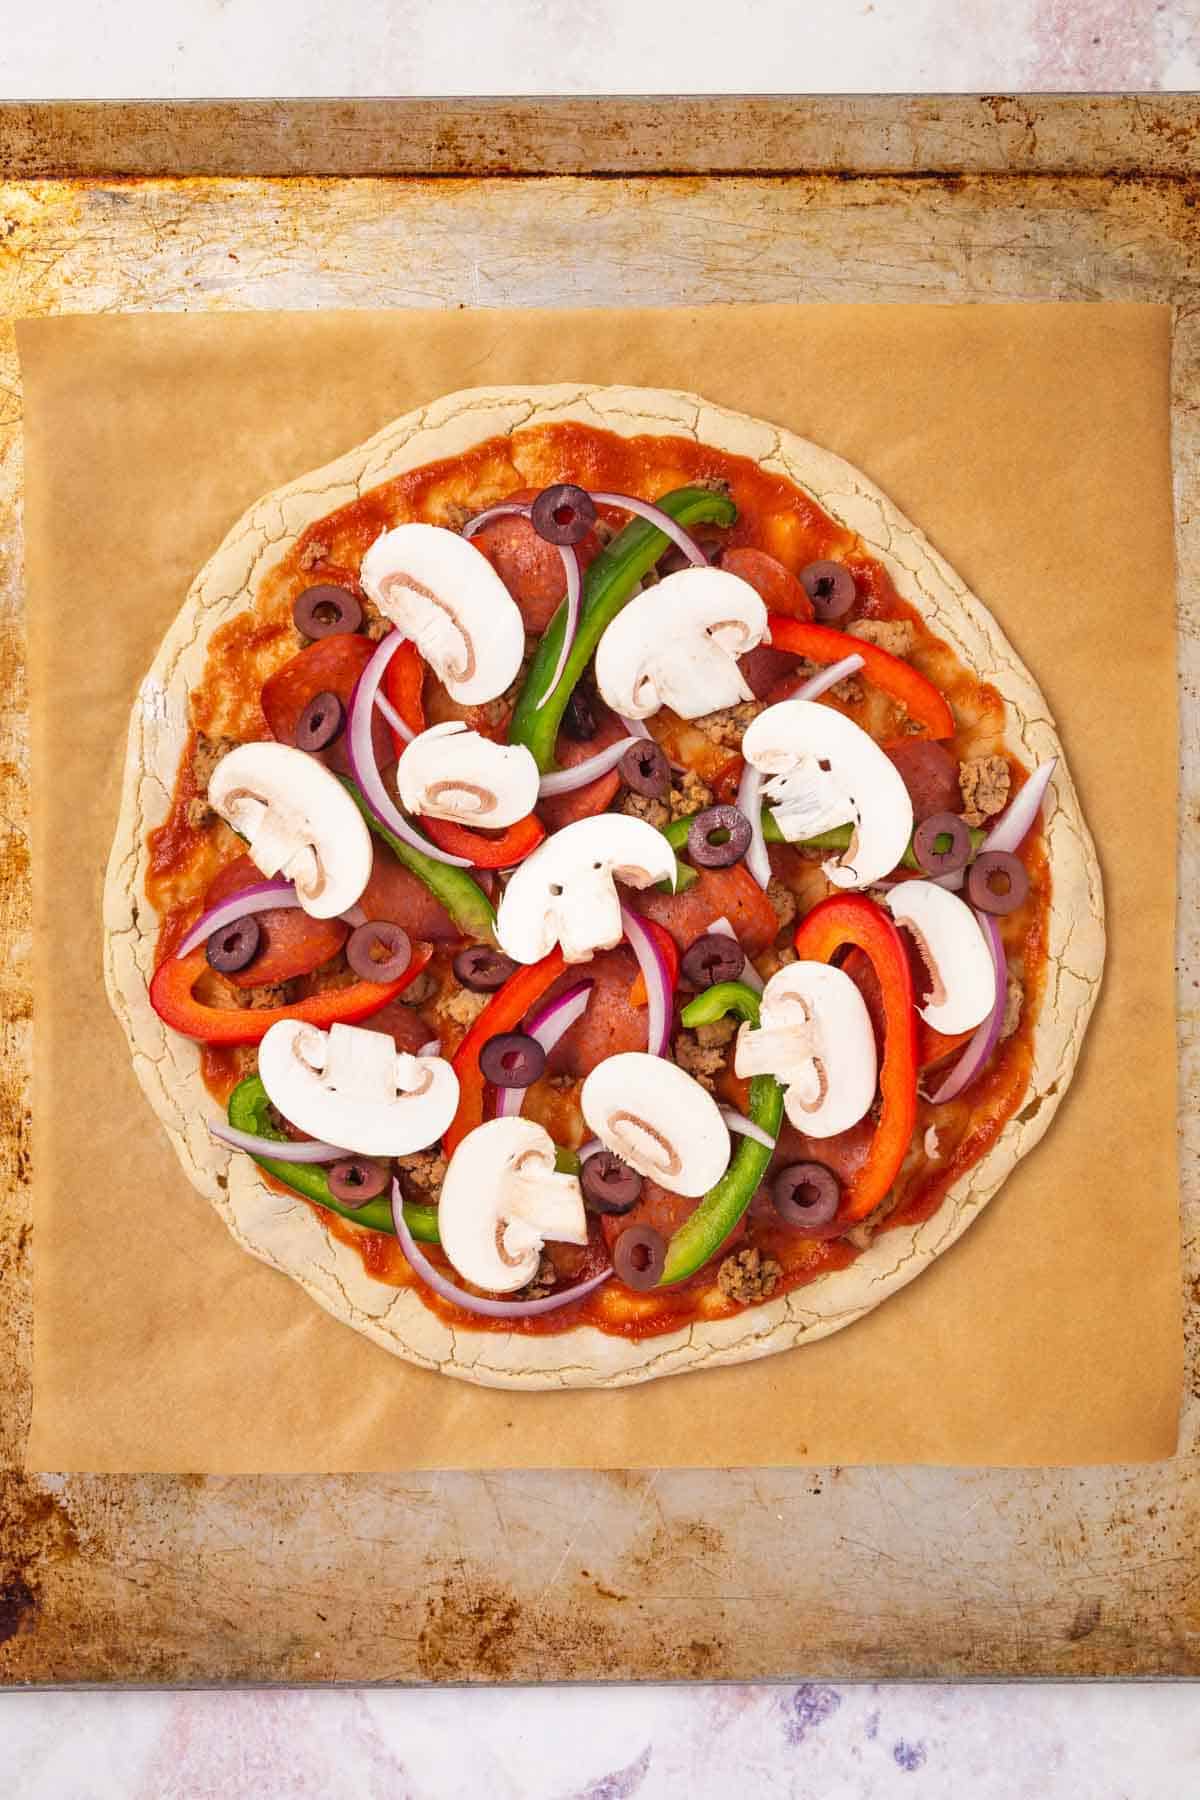 Mushrooms, Olives and the Other Veggies on Top of the Pepperoni, Sausage, Sauce and Gluten-Free Crust